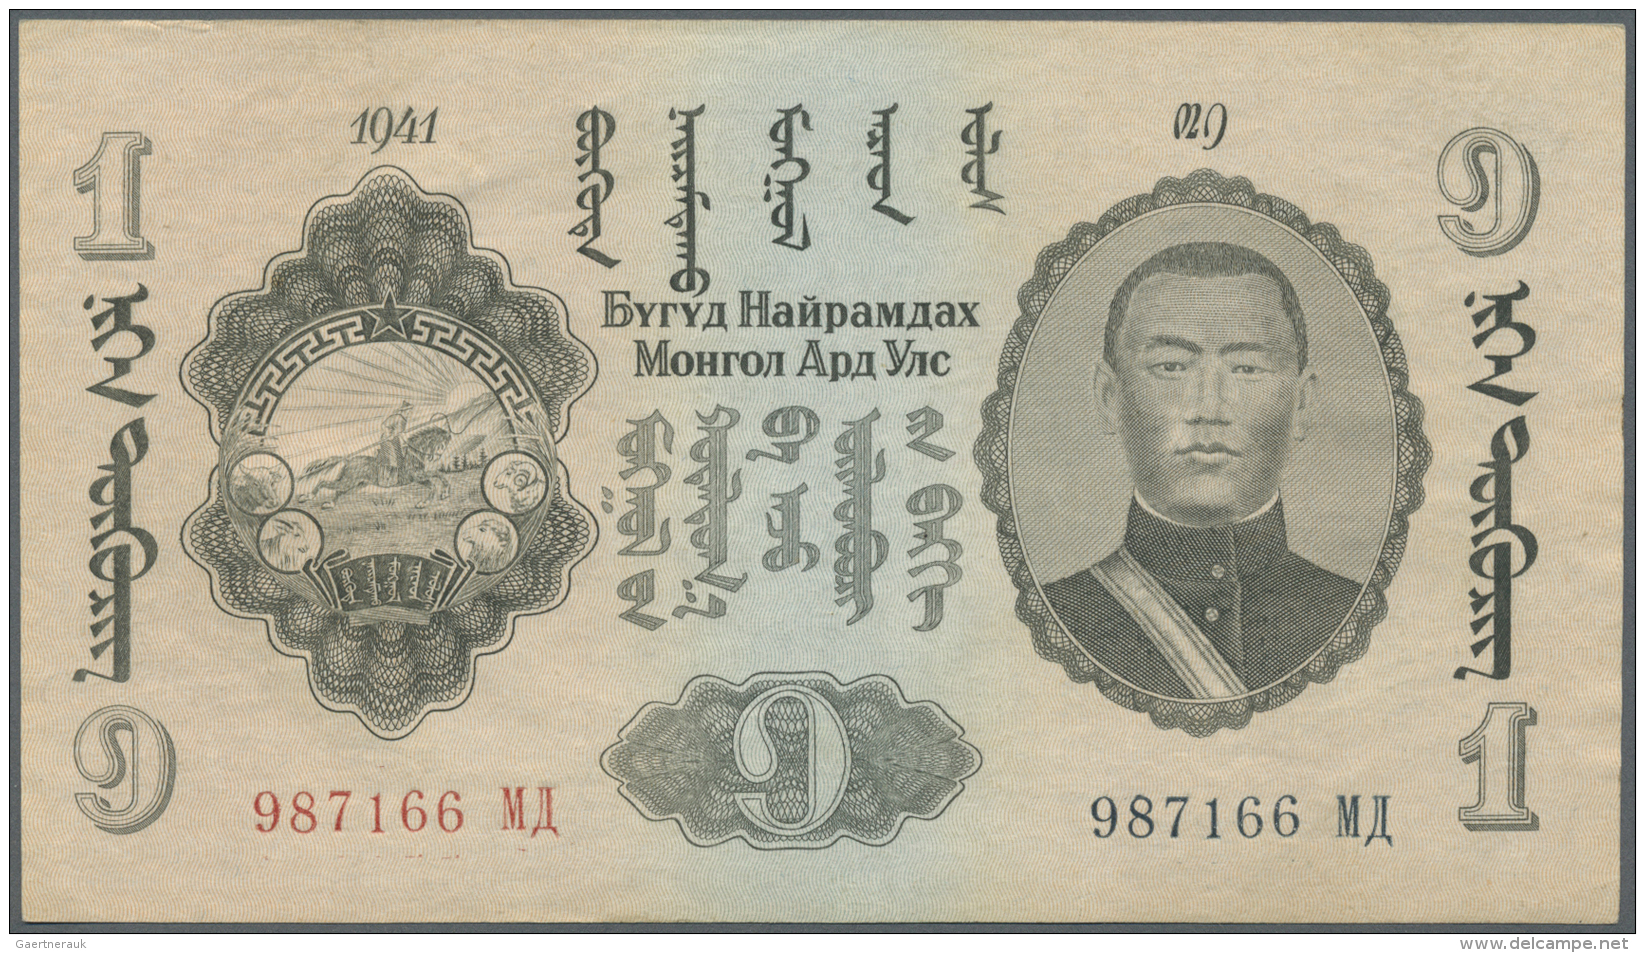 Mongolia / Mongolei: 1 Tugrik 1941 P. 21, Light Handling In Paper, No Strong Folds, No Holes Or Tears, Crisp Paper, Cond - Mongolia